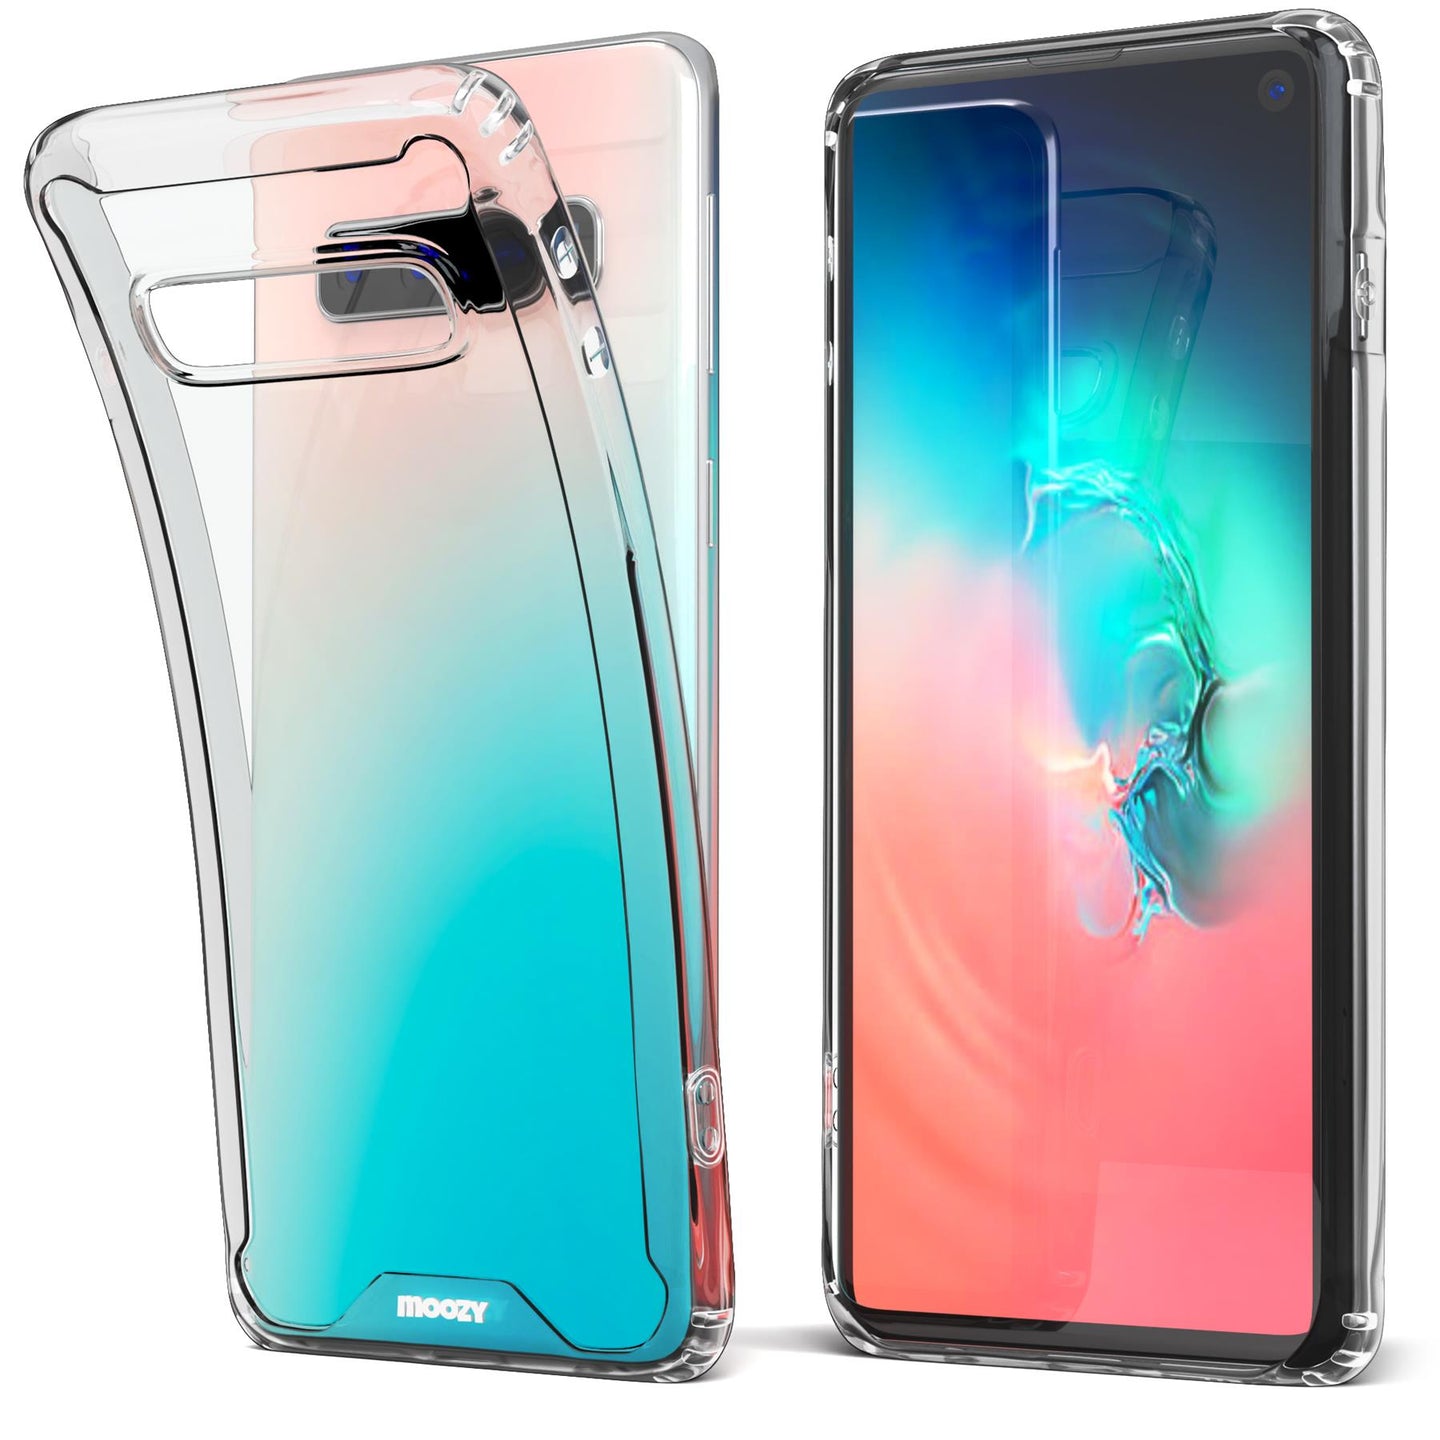 Moozy Xframe Shockproof Case for Samsung S10 - Transparent Rim Case, Double Colour Clear Hybrid Cover with Shock Absorbing TPU Rim